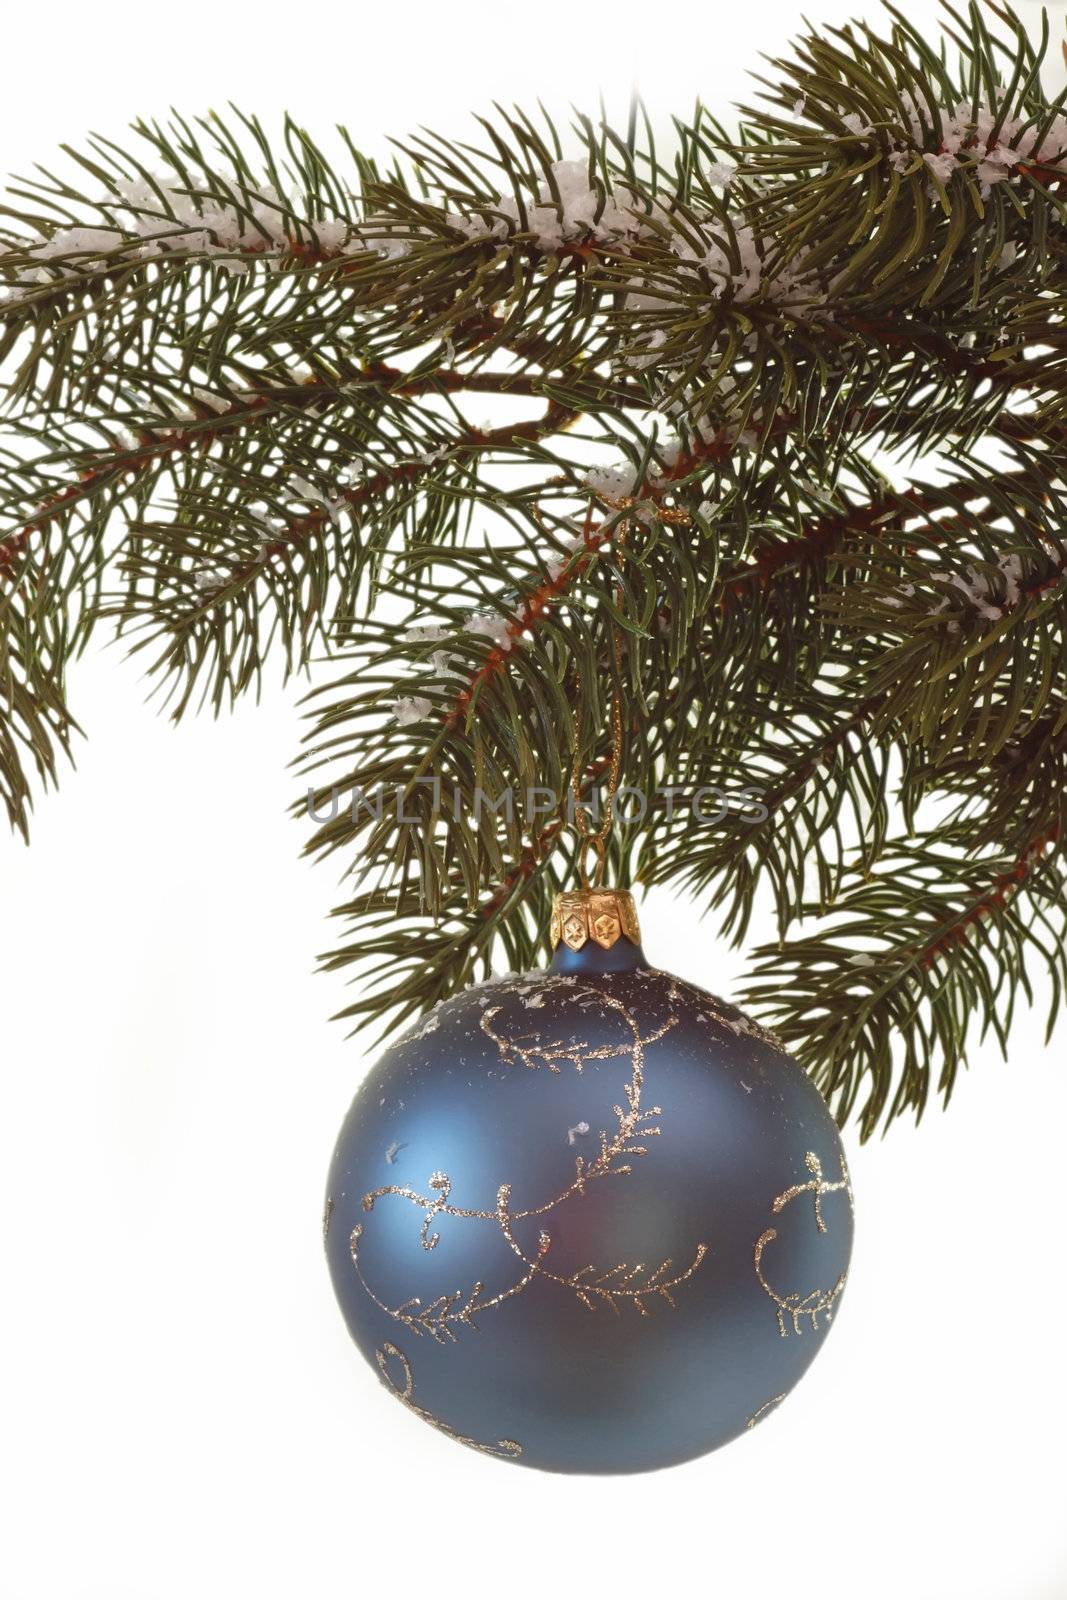 Fir branch with christmas ball by Teamarbeit